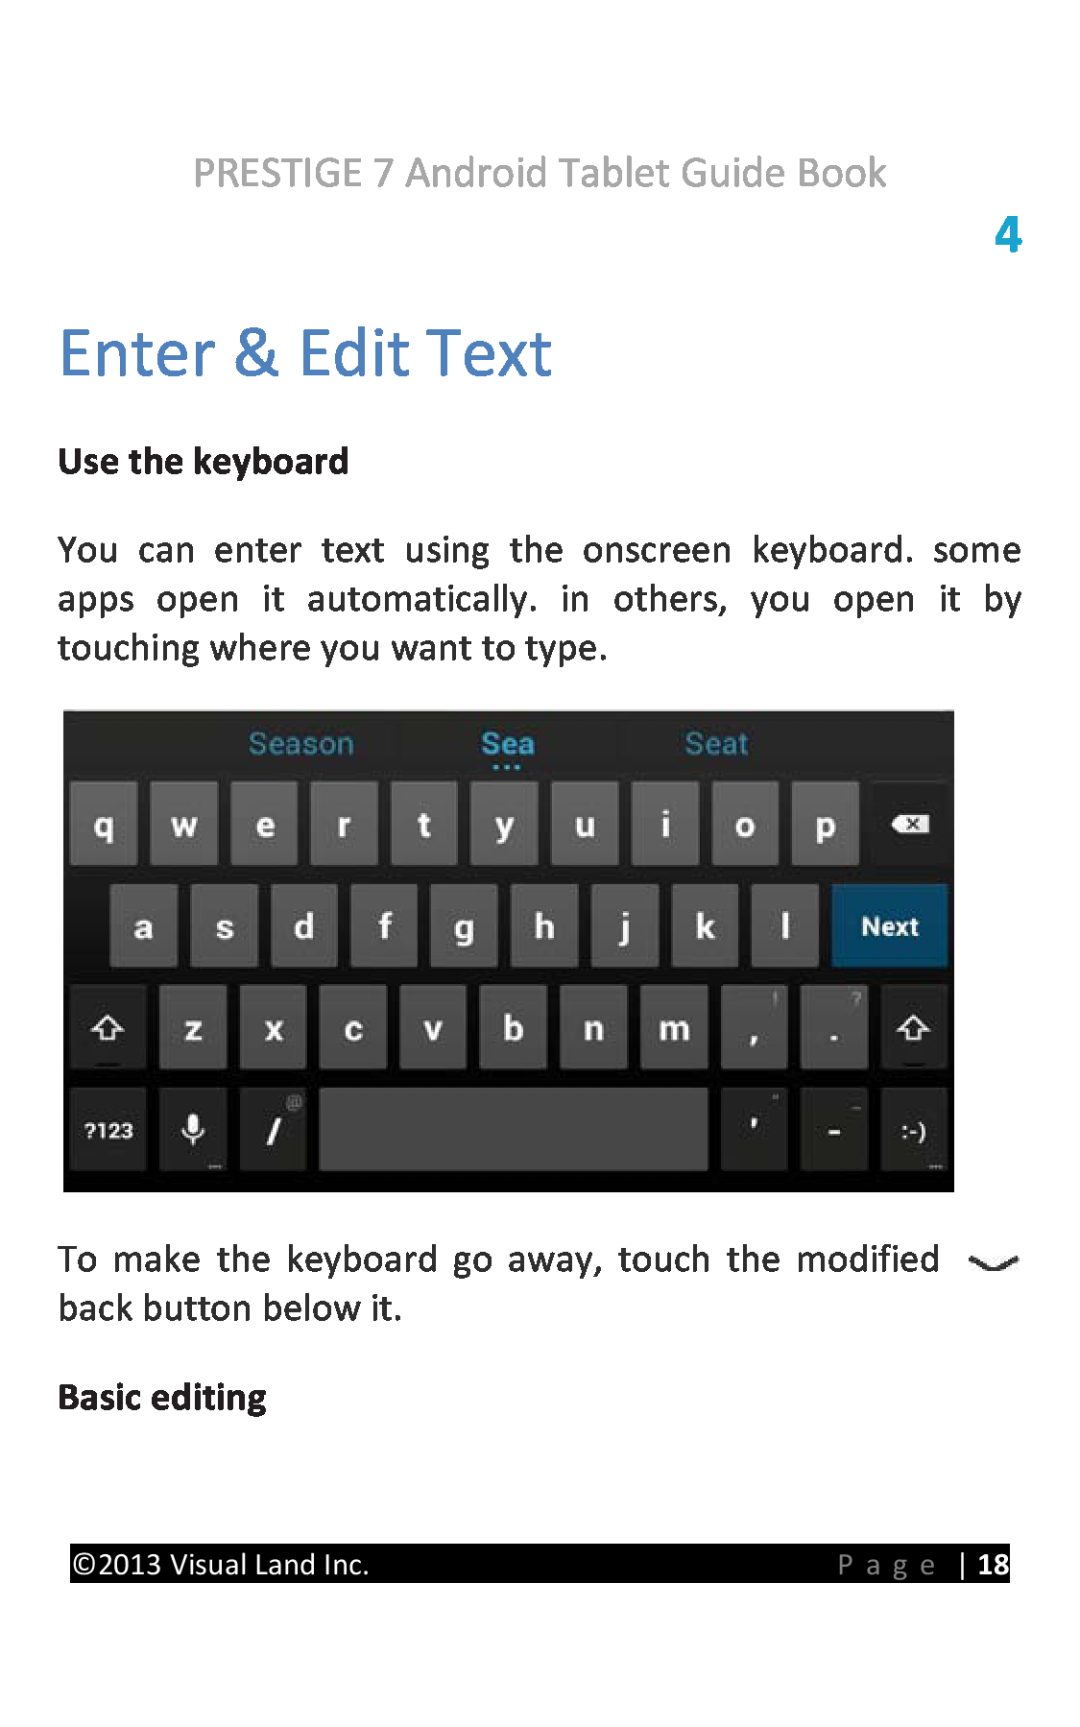 Visual Land 7D8TCBLK Enter & Edit Text, Use the keyboard, Basic editing, PRESTIGE 7 Android Tablet Guide Book, P a g e 